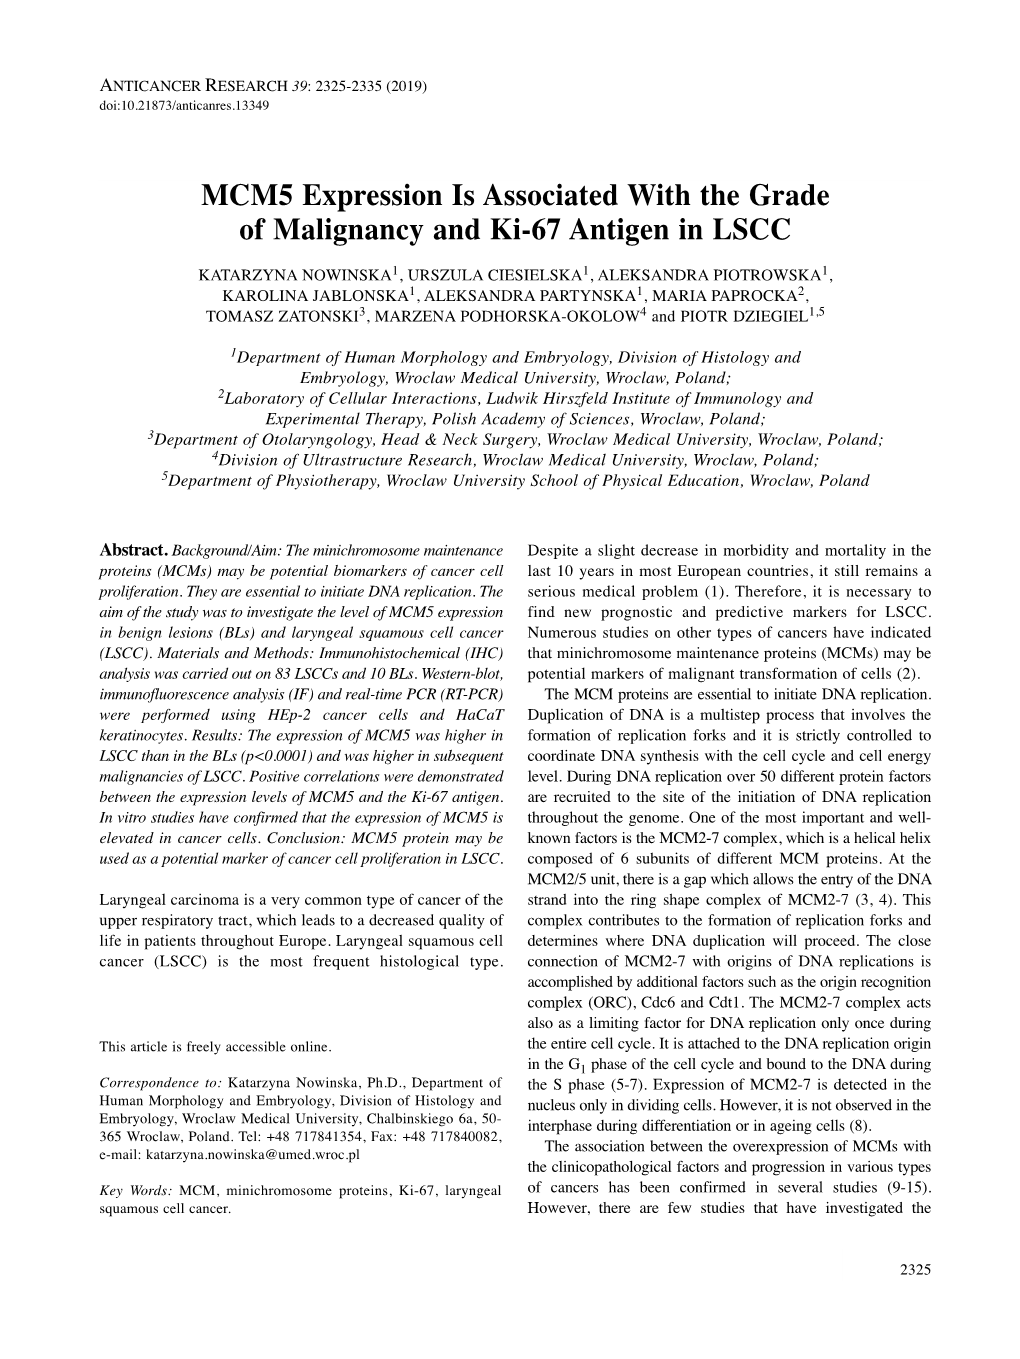 MCM5 Expression Is Associated with the Grade of Malignancy and Ki-67